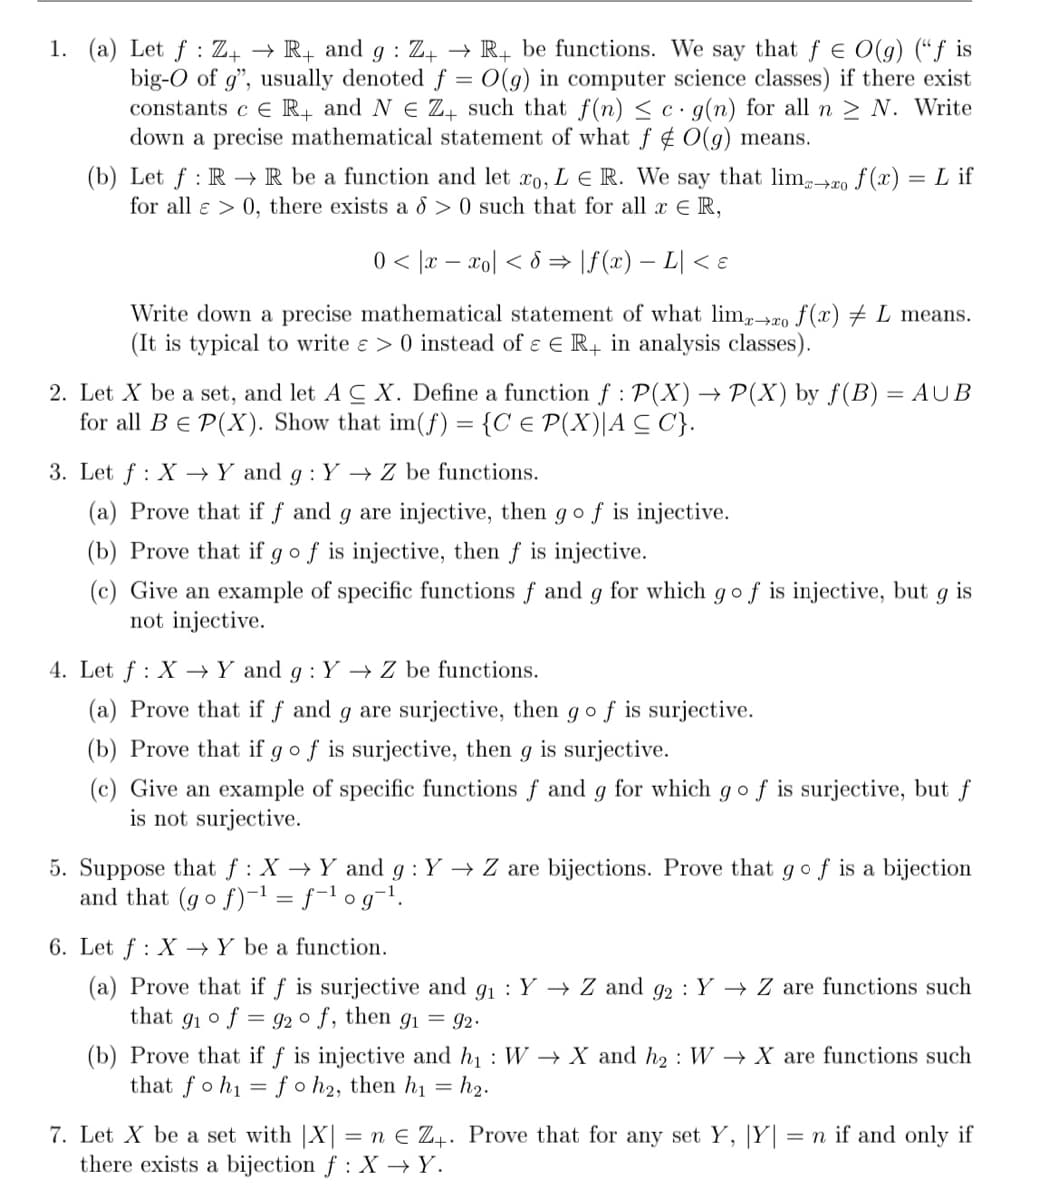 1. (a) Let f : Z+ → R+ and g : Z4 → R+ be functions. We say that f E O(g) (“f is
big-O of g", usually denoted f = 0(g) in computer science classes) if there exist
constants c e R, and N E Z̟ such that f(n) < c· g(n) for all n > N. Write
down a precise mathematical statement of what f ¢ O(g) means.
(b) Let f : R –→ R be a function and let ro, L E R. We say that lim+ro f (x) = L if
for all e > 0, there exists a 8 > 0 such that for all x E R,
0 < |x – xo| < 8 → \f(x) – L| < ɛ
Write down a precise mathematical statement of what lim,-20 f(x) # L means.
(It is typical to write e > 0 instead of ɛ E R in analysis classes).
2. Let X be a set, and let A C X. Define a function f : P(X) → P(X) by f(B) = AUB
for all BE P(X). Show that im(f) = {C € P(X)|A C C}.
3. Let f : X →Y and g : Y → Z be functions.
(a) Prove that if f and g are injective, then g o f is injective.
(b) Prove that if g o f is injective, then f is injective.
(c) Give an example of specific functions f and g for which g o f is injective, but g is
not injective.
4. Let f : X –→Y and g : Y → Z be functions.
(a) Prove that if f and g are surjective, then gof is surjective.
(b) Prove that if gof is surjective, then g is surjective.
(c) Give an example of specific functions f and g for which gof is surjective, but f
is not surjective.
5. Suppose that f : X →Y and g : Y → Z are bijections. Prove that gof is a bijection
and that (go f)-1 = f-l og¬1.
6. Let f : X →Y be a function.
(a) Prove that if f is surjective and g1 : Y → Z and g2 : Y → Z are functions such
that gi ° f
= 92 o f, then g1 = 92.
(b) Prove that if f is injective and h1 : W → X and h2 : W → X are functions such
that foh1 = f o h2, then hi
= h2.
7. Let X be a set with |X| = n E Z4. Prove that for any set Y,
there exists a bijection f : X →Y.
|Y|
= n if and only if
